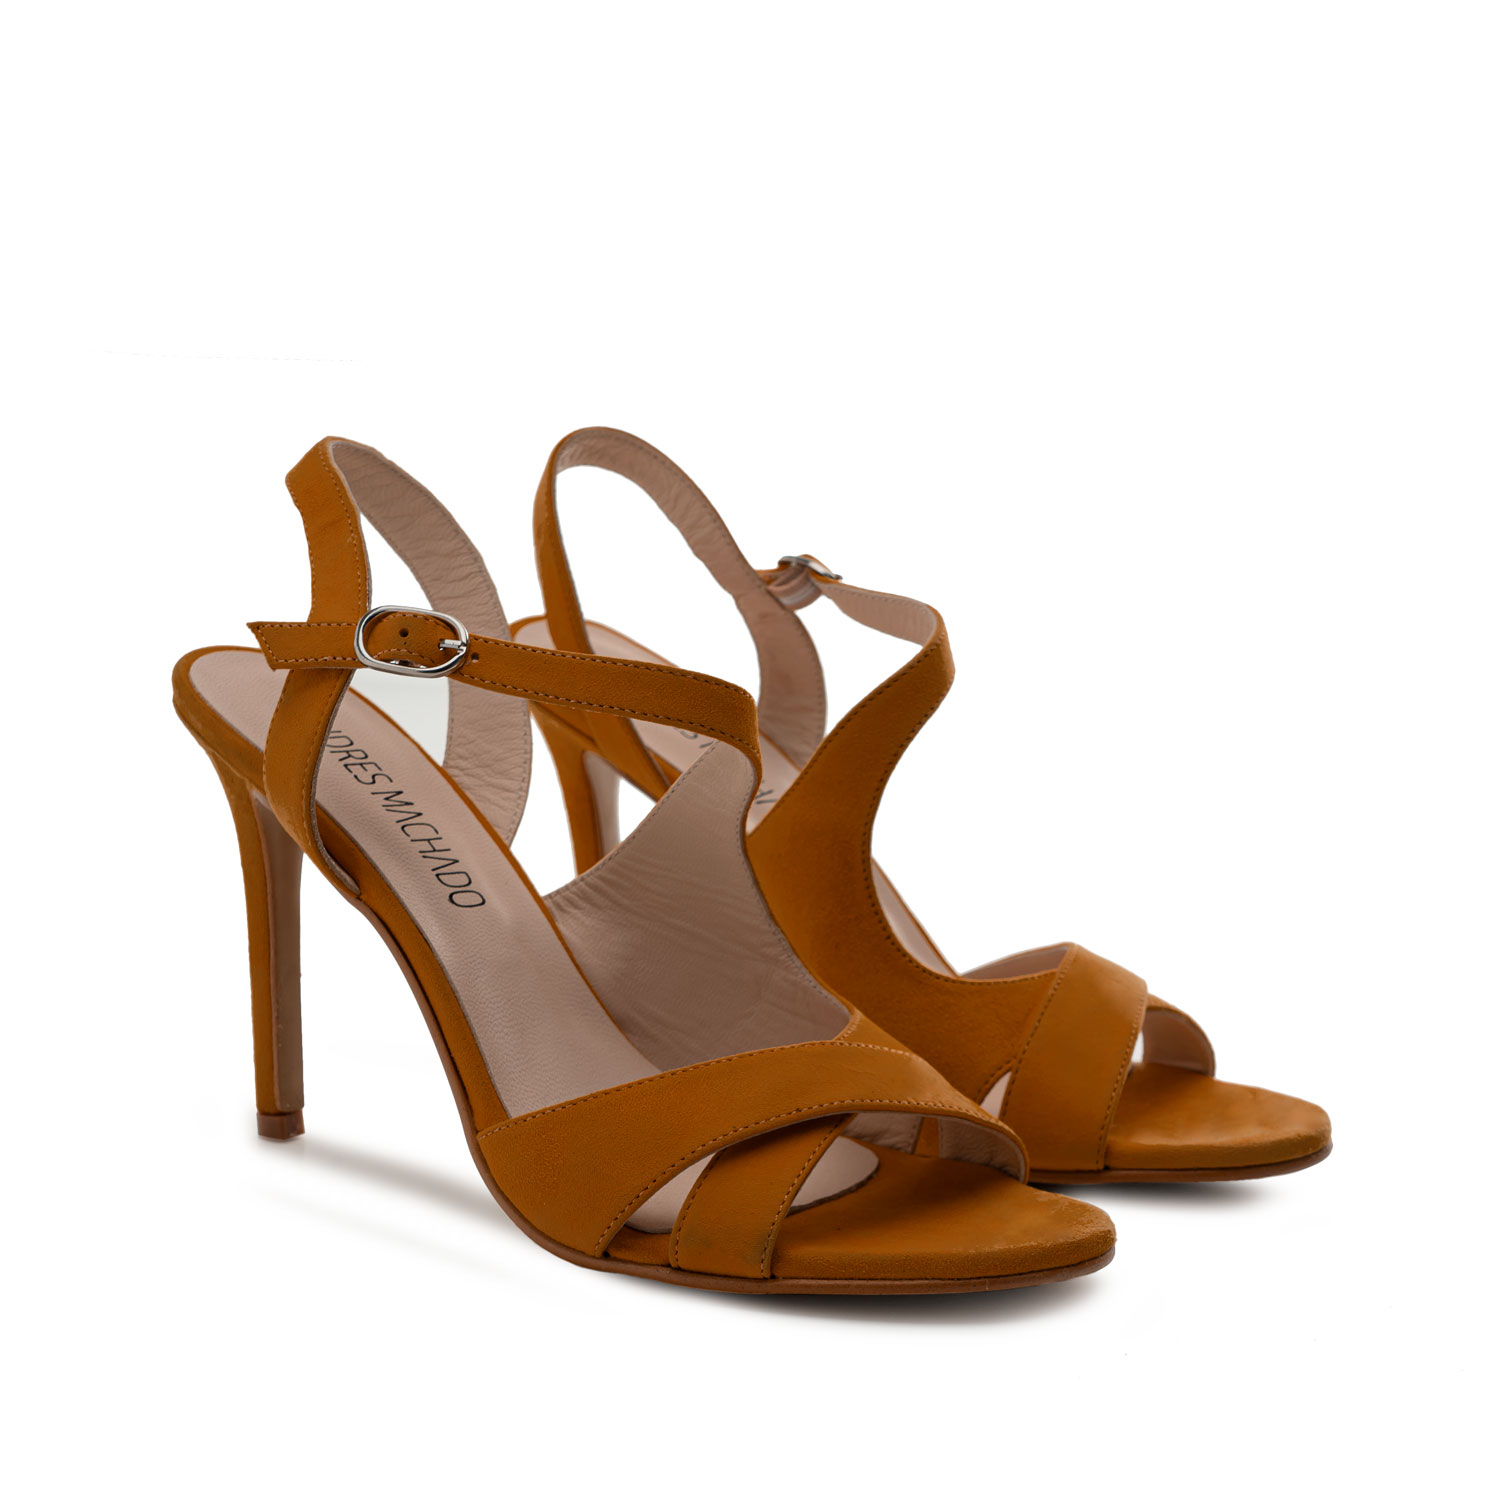 Stiletto Sandals in Camel Suede Leather 